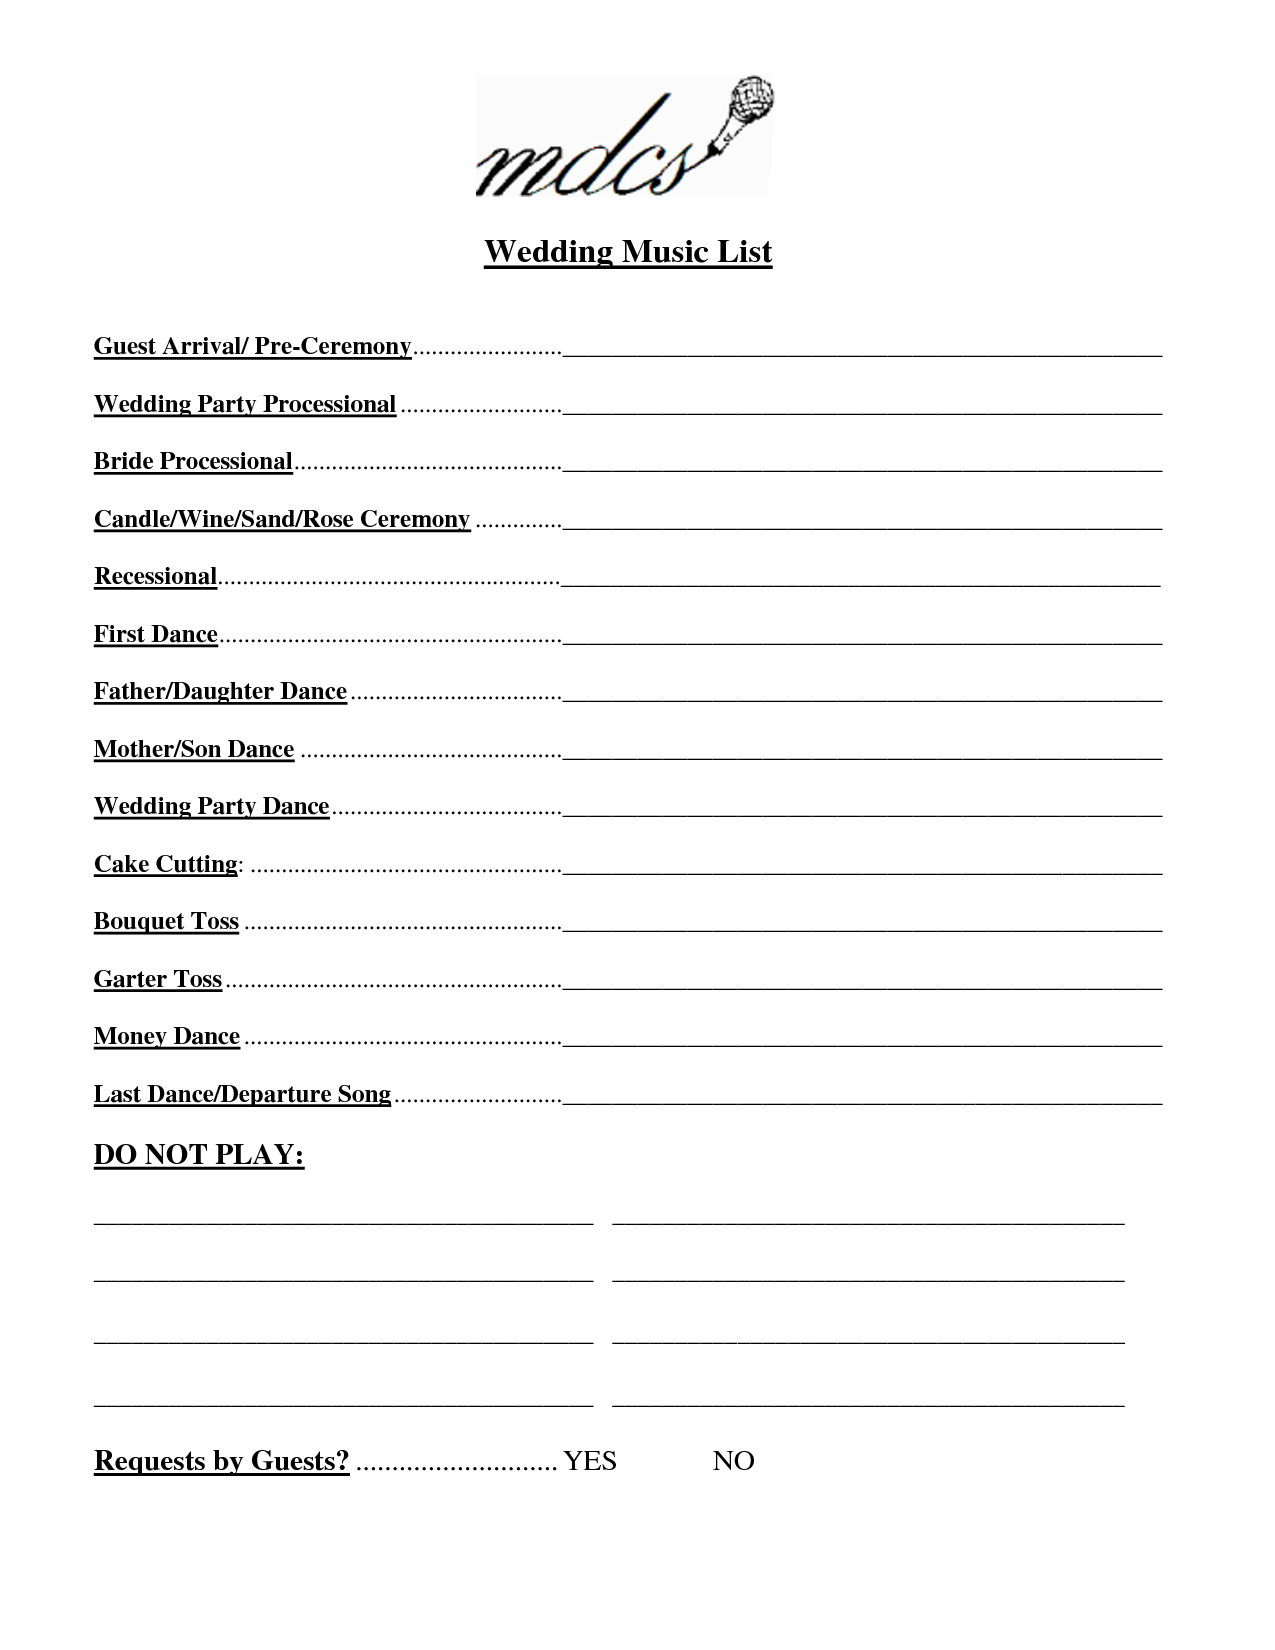 Wedding Party List Template Free Fosterhaley Wedding Music intended for proportions 1275 X 1650